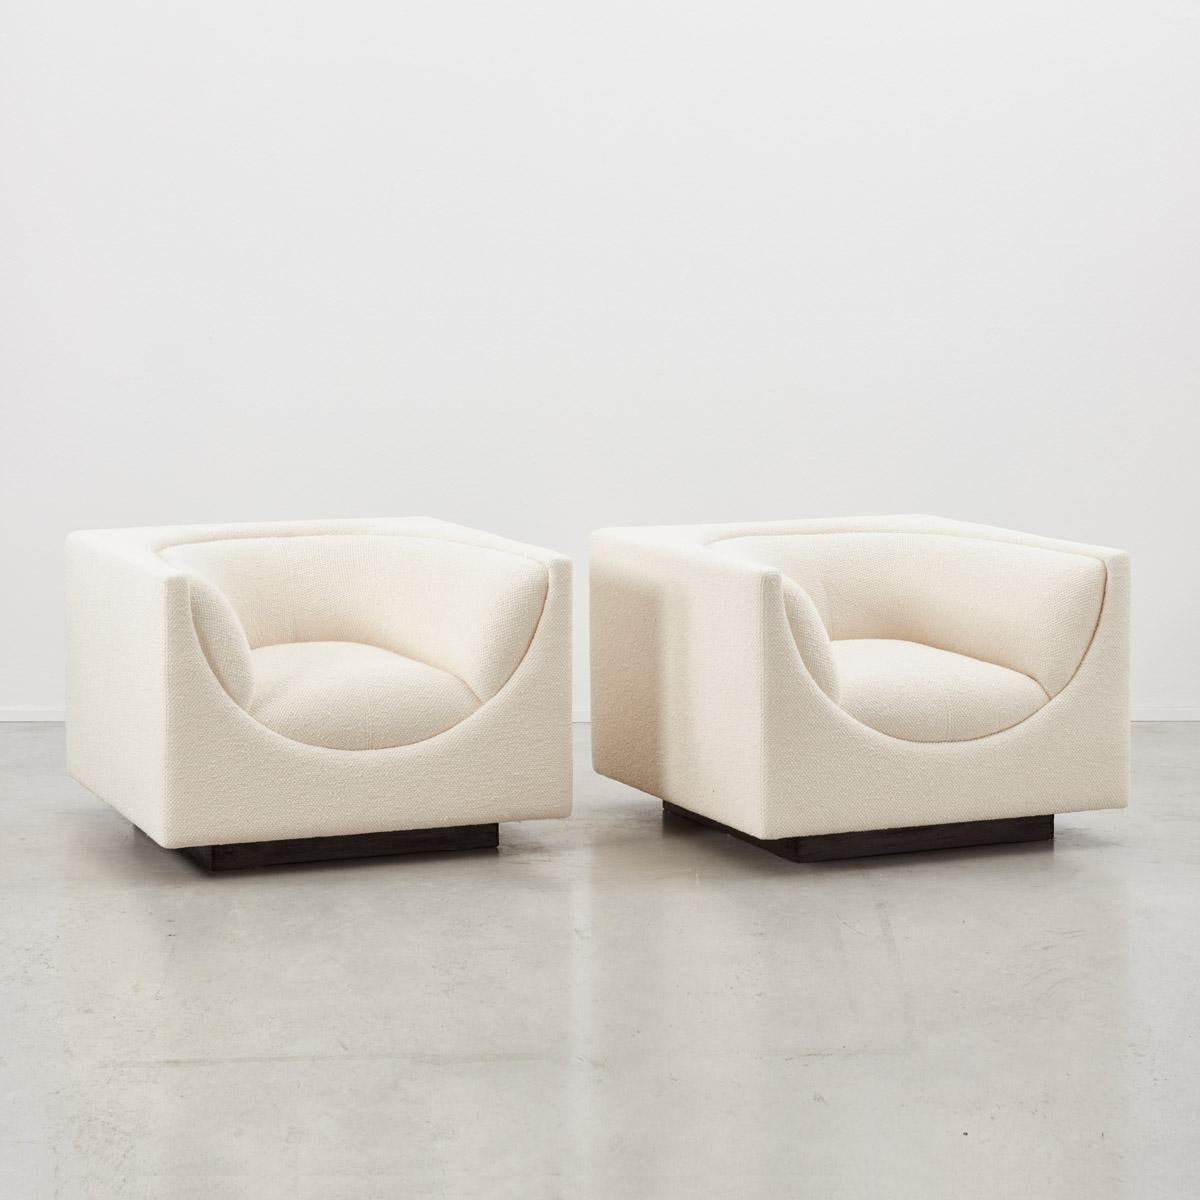 Coming soon….

These 1970s Cubo chairs take cuboid forms and scoop out their core. They were designed by Jorge Zalszupin, a Polish architect who moved to Brazil, having been inspired by the works of Brazilians Oscar Niemeyer and Roberto Burle